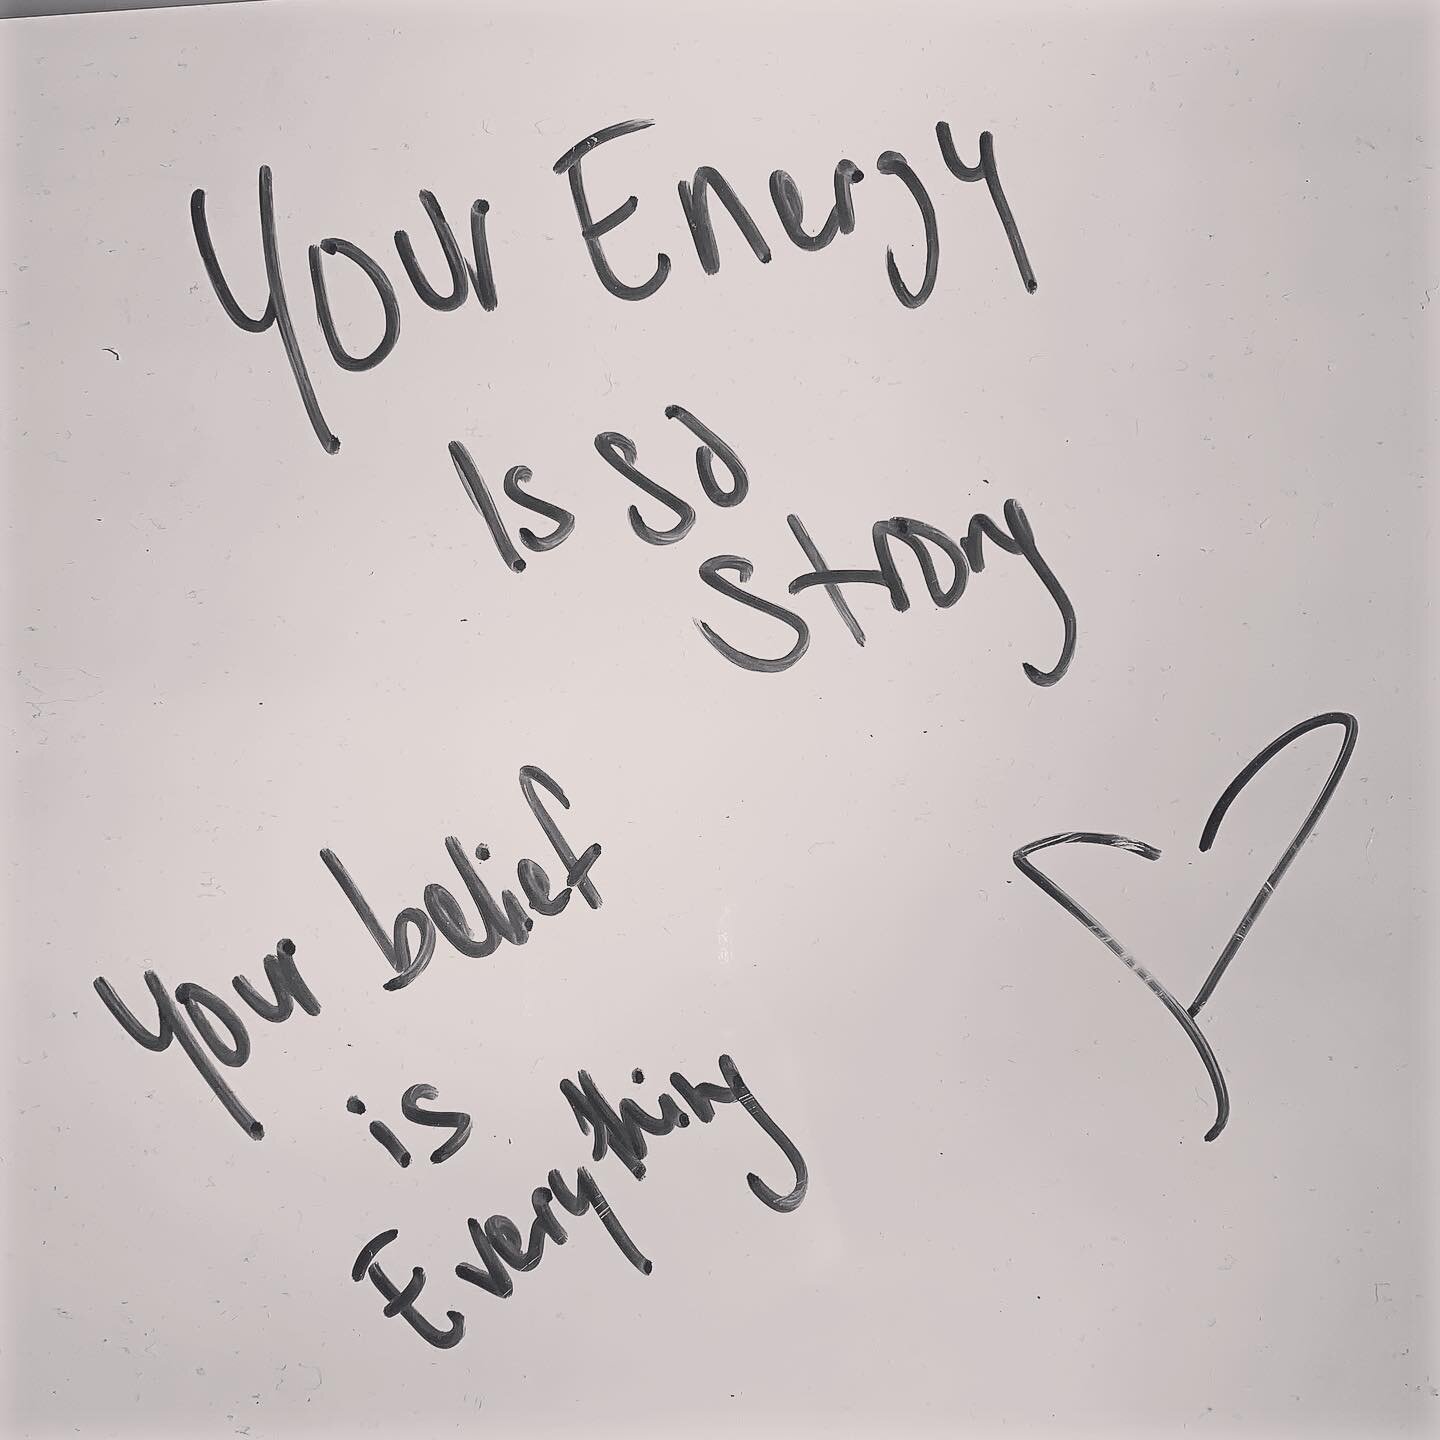 This is the good stuff. As seen on my whiteboard, a message to myself and you.
.
Your energy is so strong. Your belief is everything. You can bring your passions, strengths, values to life. Wholly and authentically expressed in a #careerforyears 
.
9